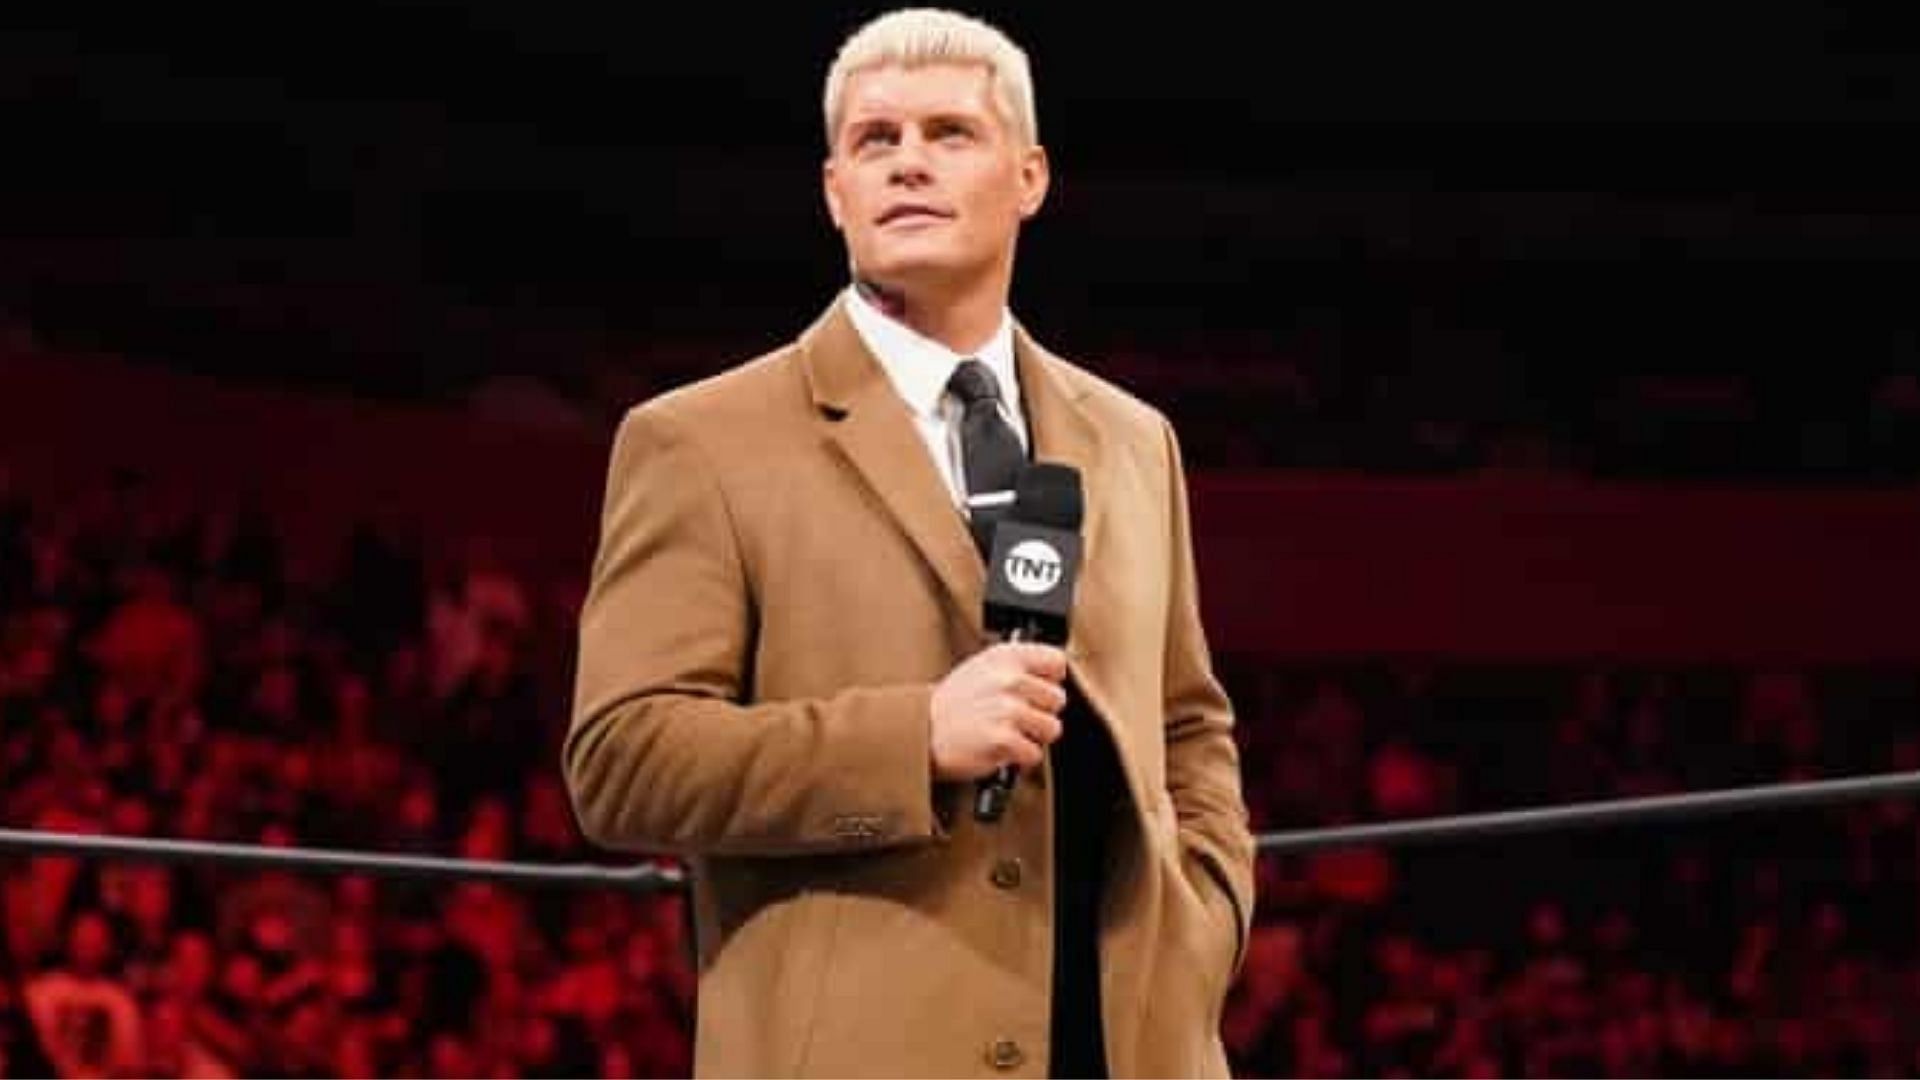 Cody Rhodes had been working without a contract before departing